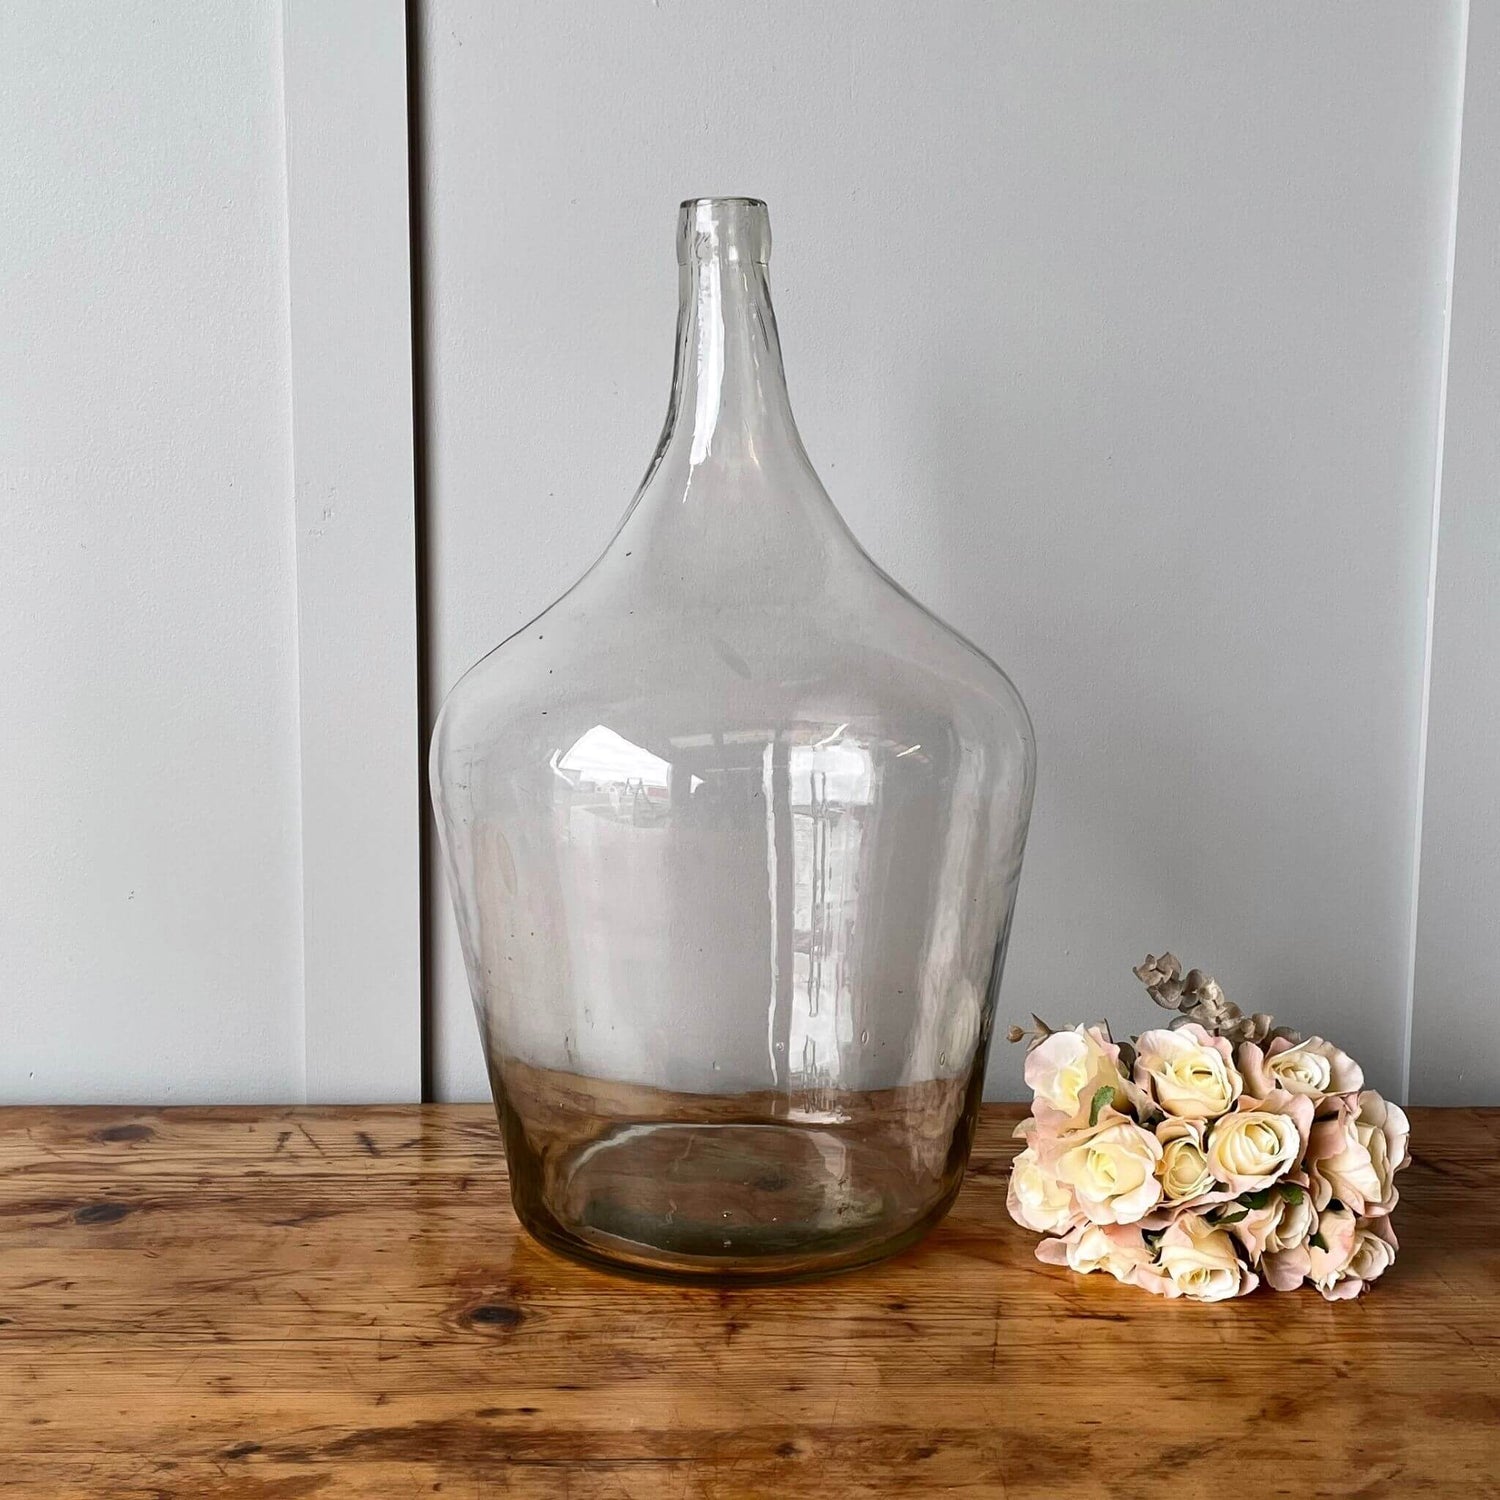 A vintage glass carboy